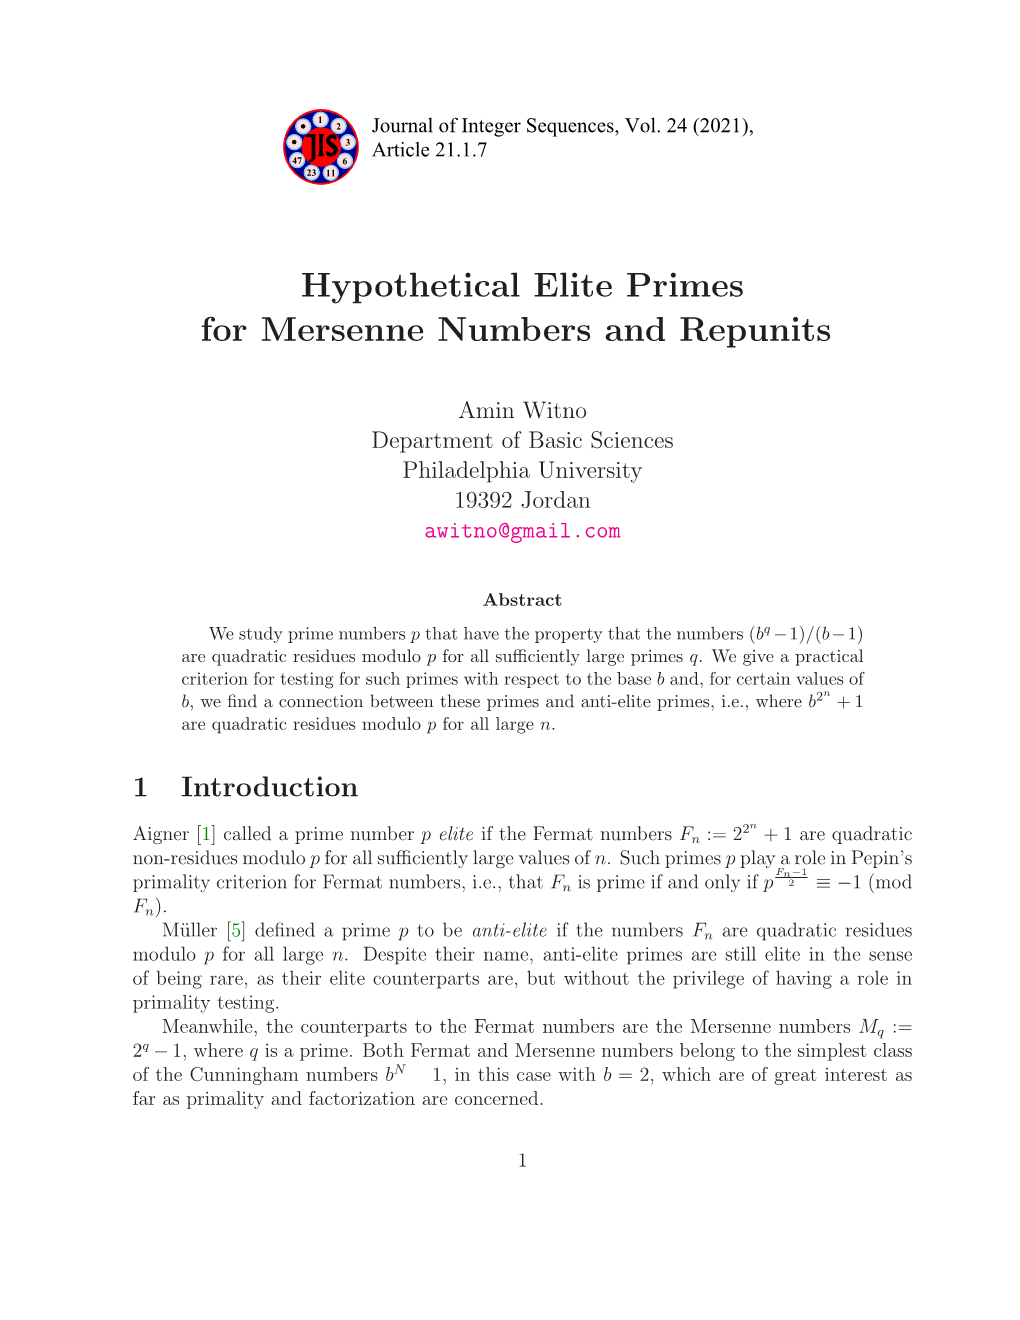 Hypothetical Elite Primes for Mersenne Numbers and Repunits